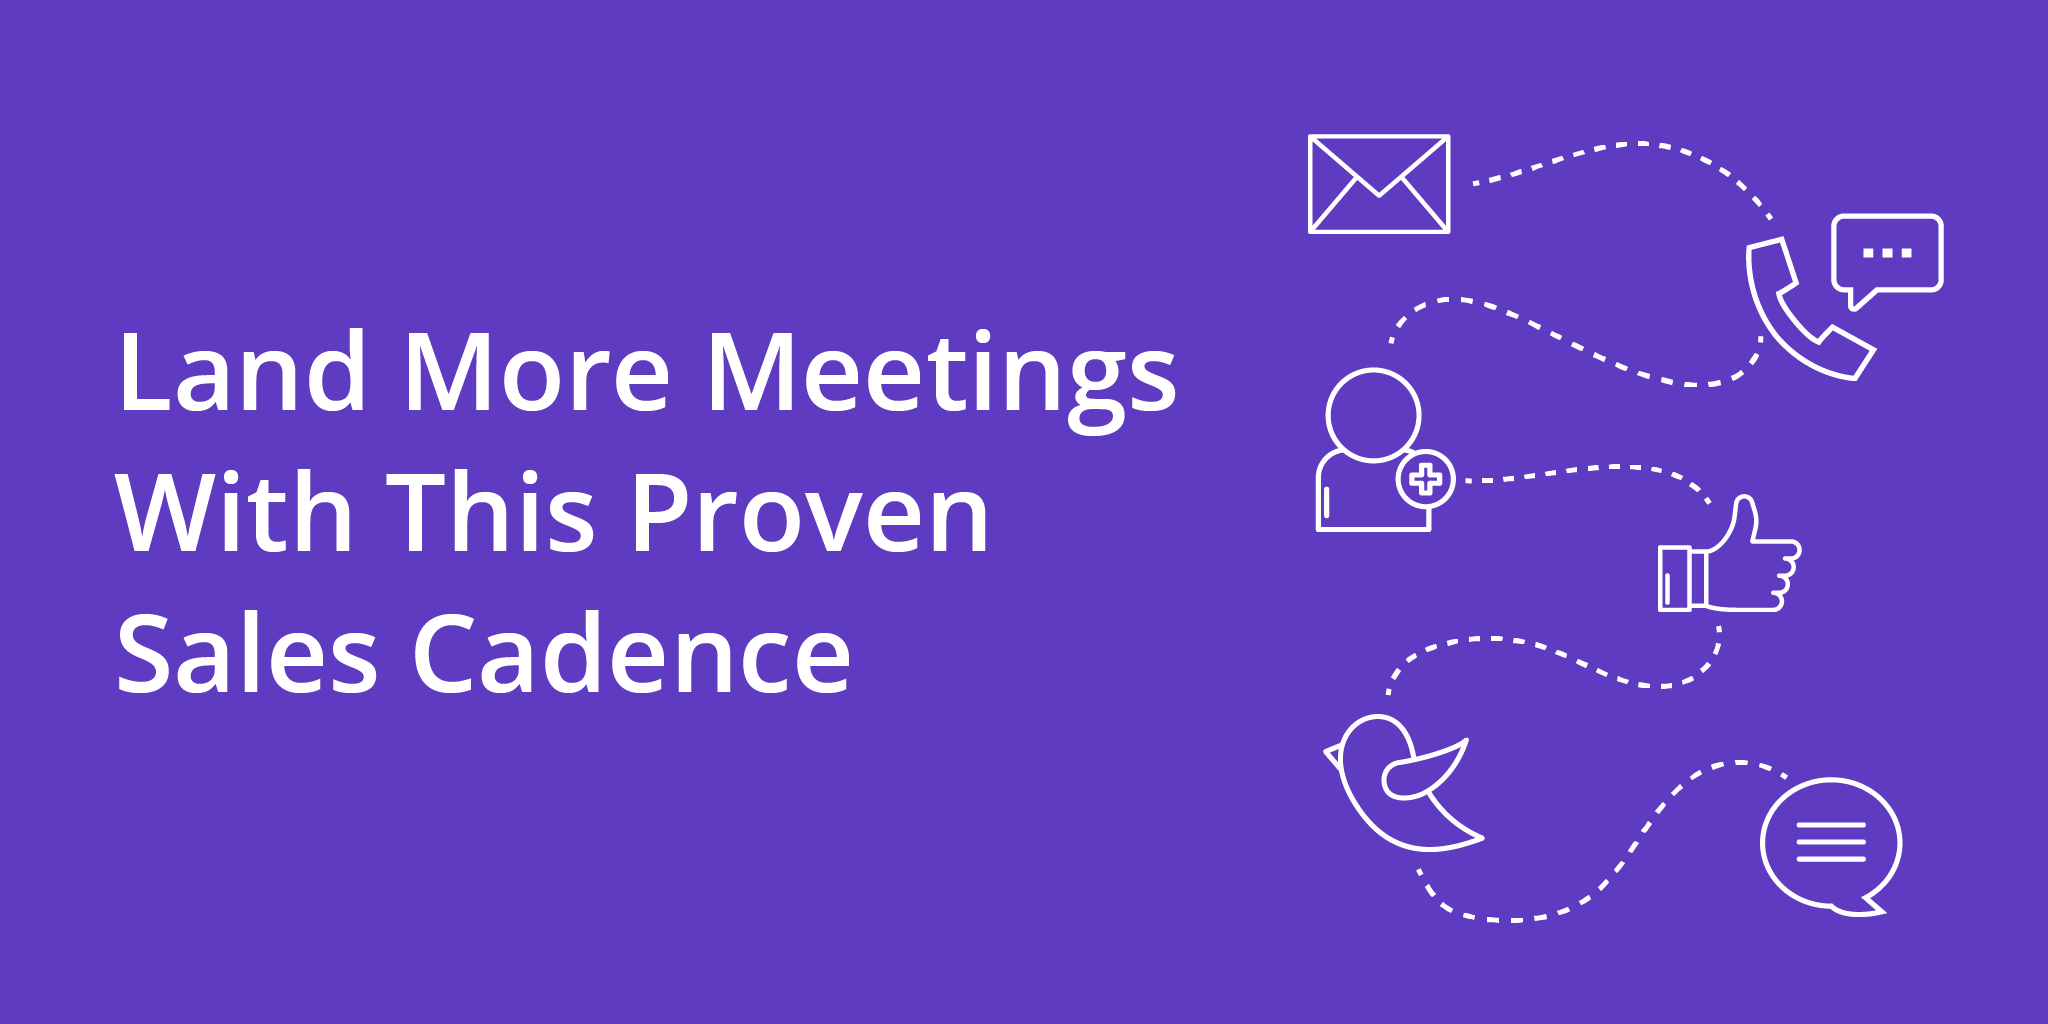 Land More Meetings With This Proven Sales Cadence | Telephones for business